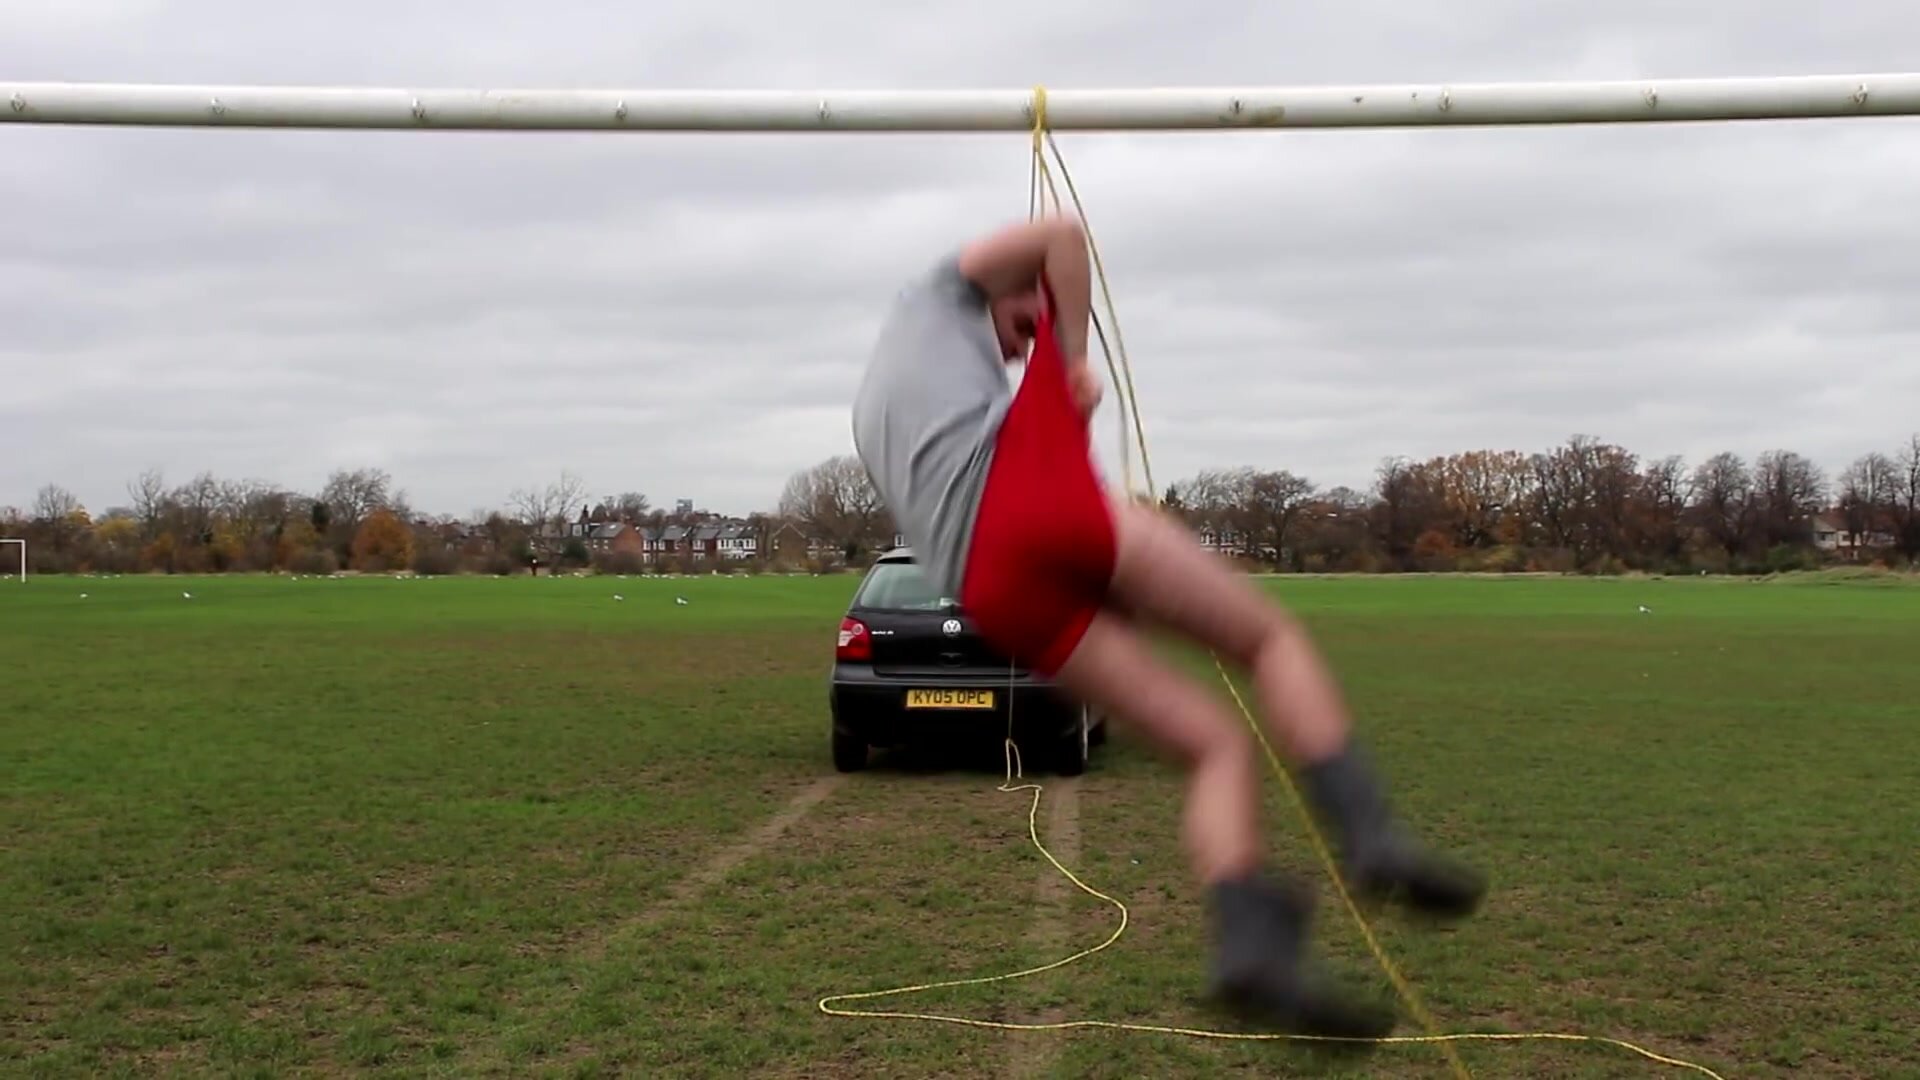 2 guys being car wedgied from a goal post